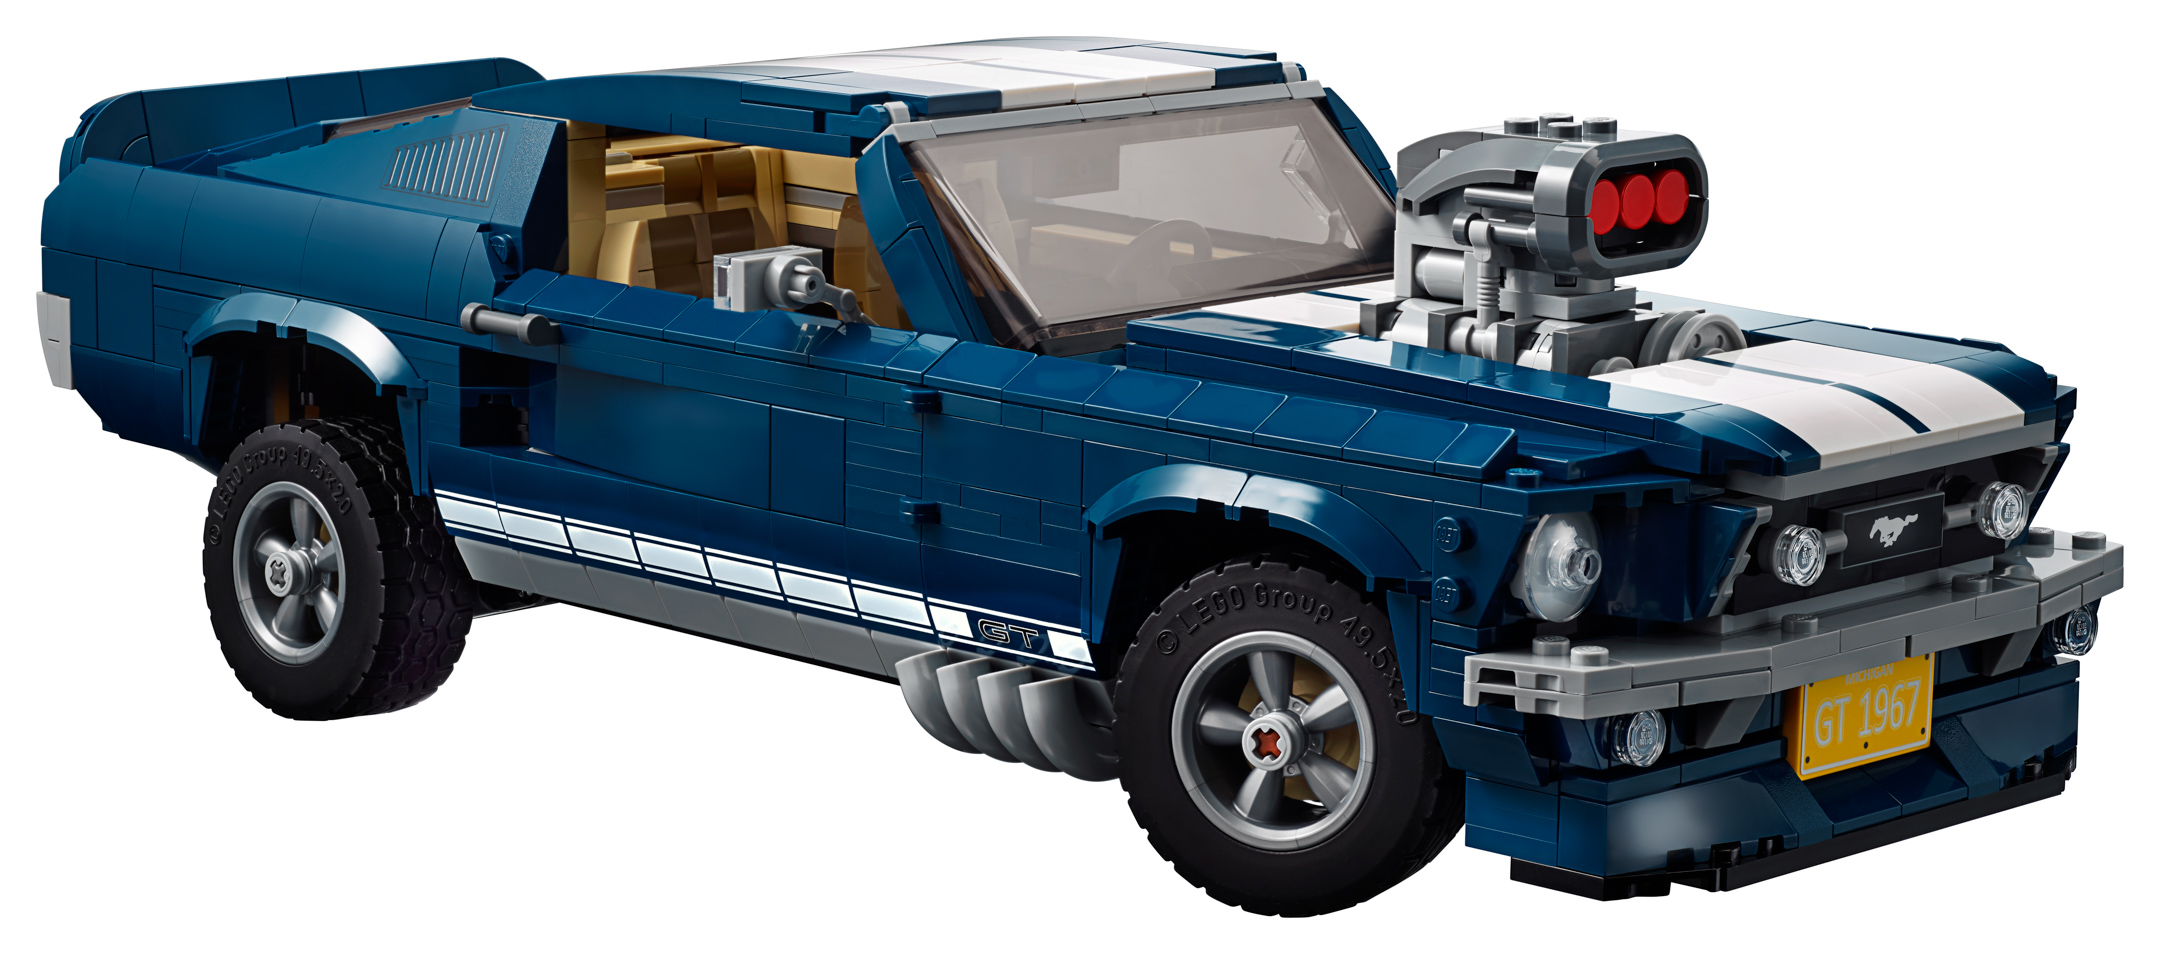 c8589 10265 LEGO Creator Expert Ford Mustang 12